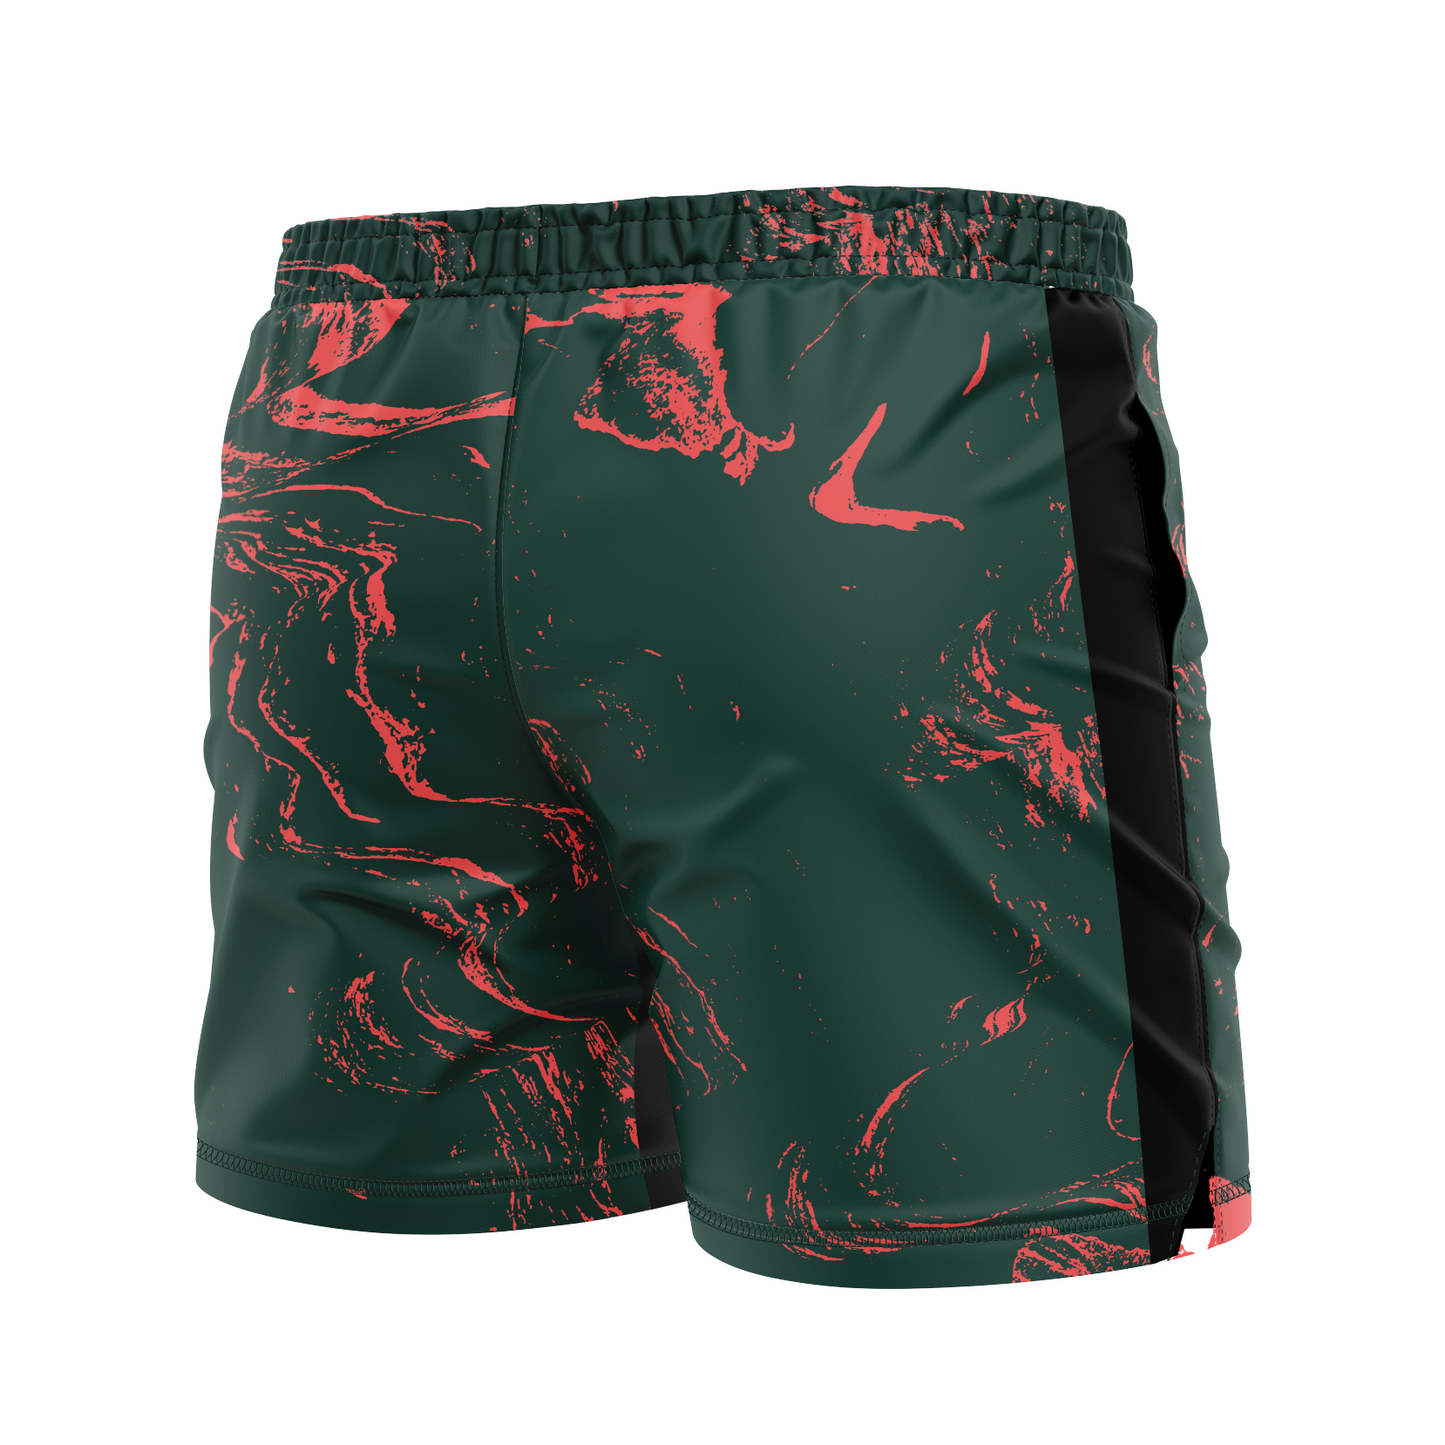 CCFC men's FC shorts Zombie Flamingos, midnight green and pink